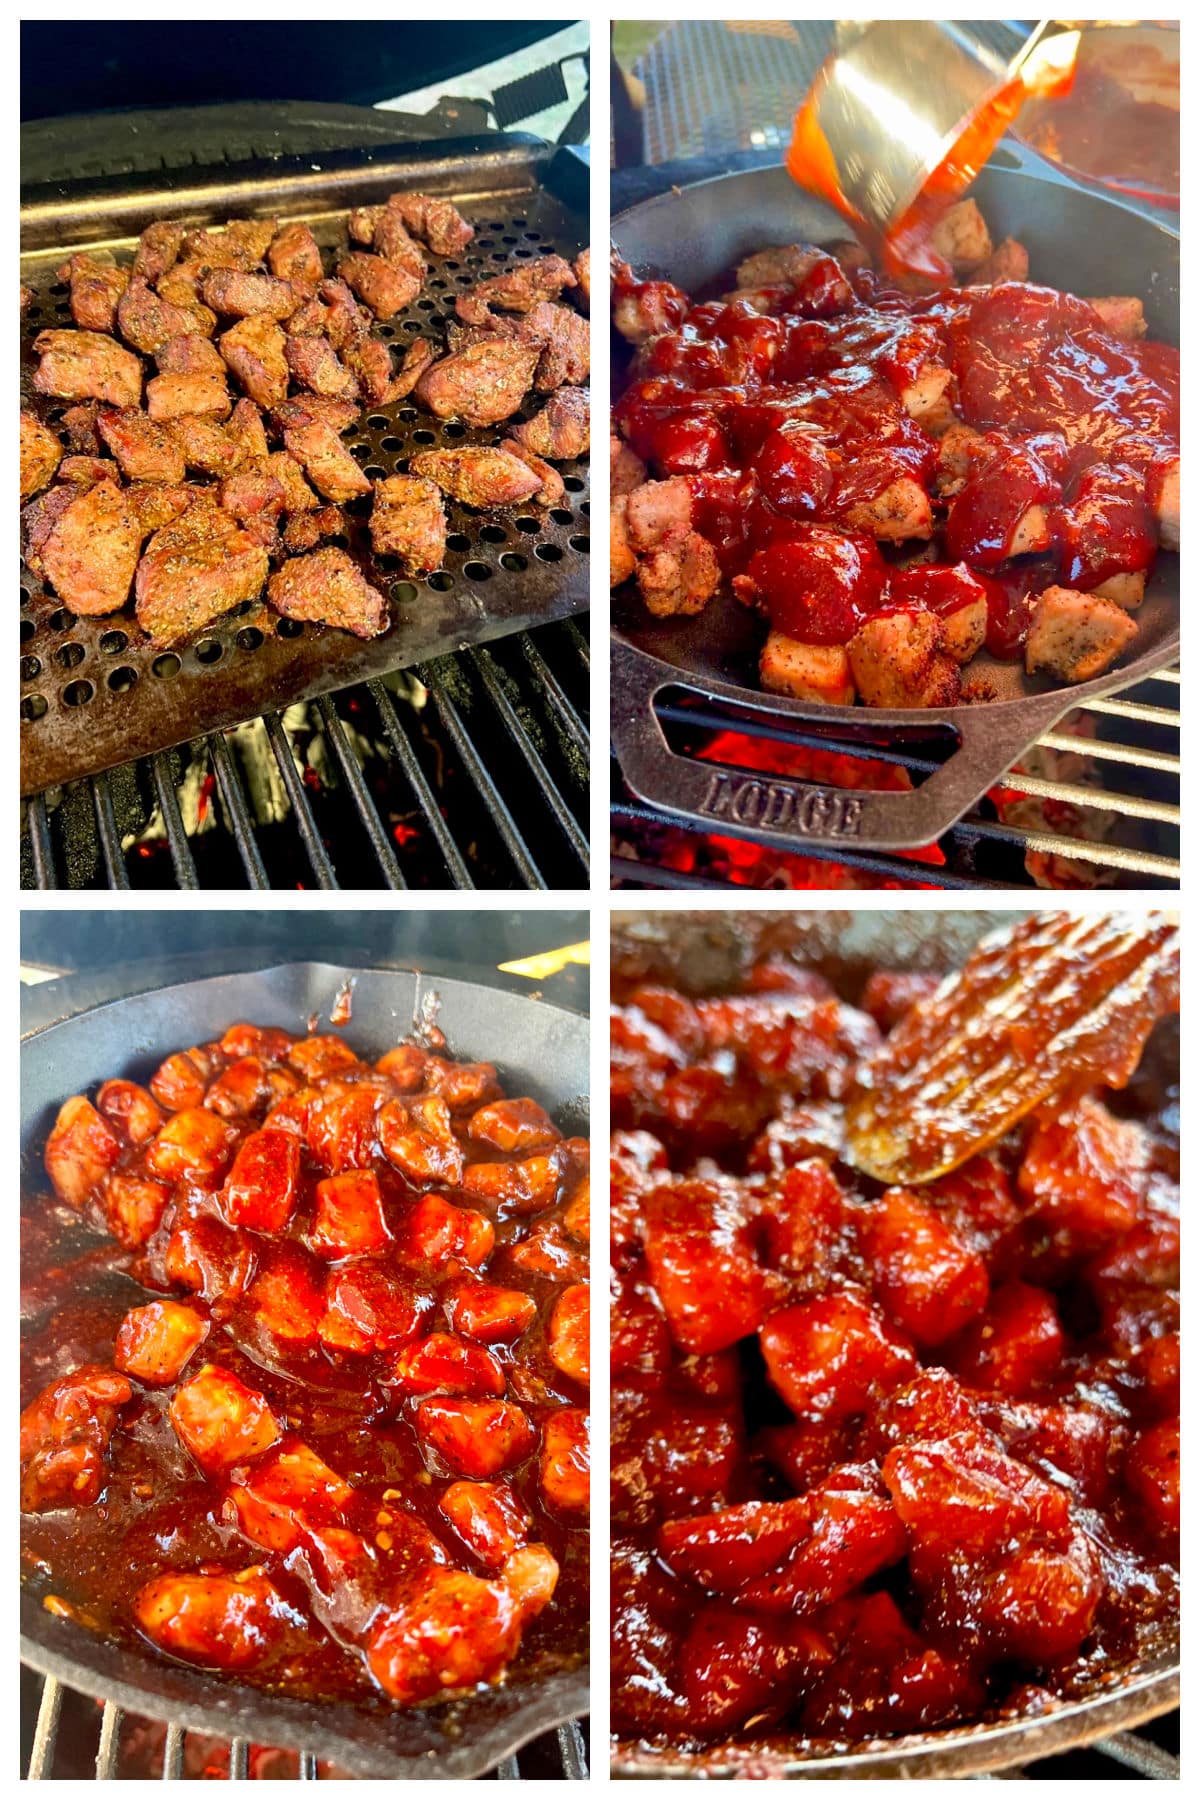 Collage: cooking pork chunks on a grill, with bbq sauce.